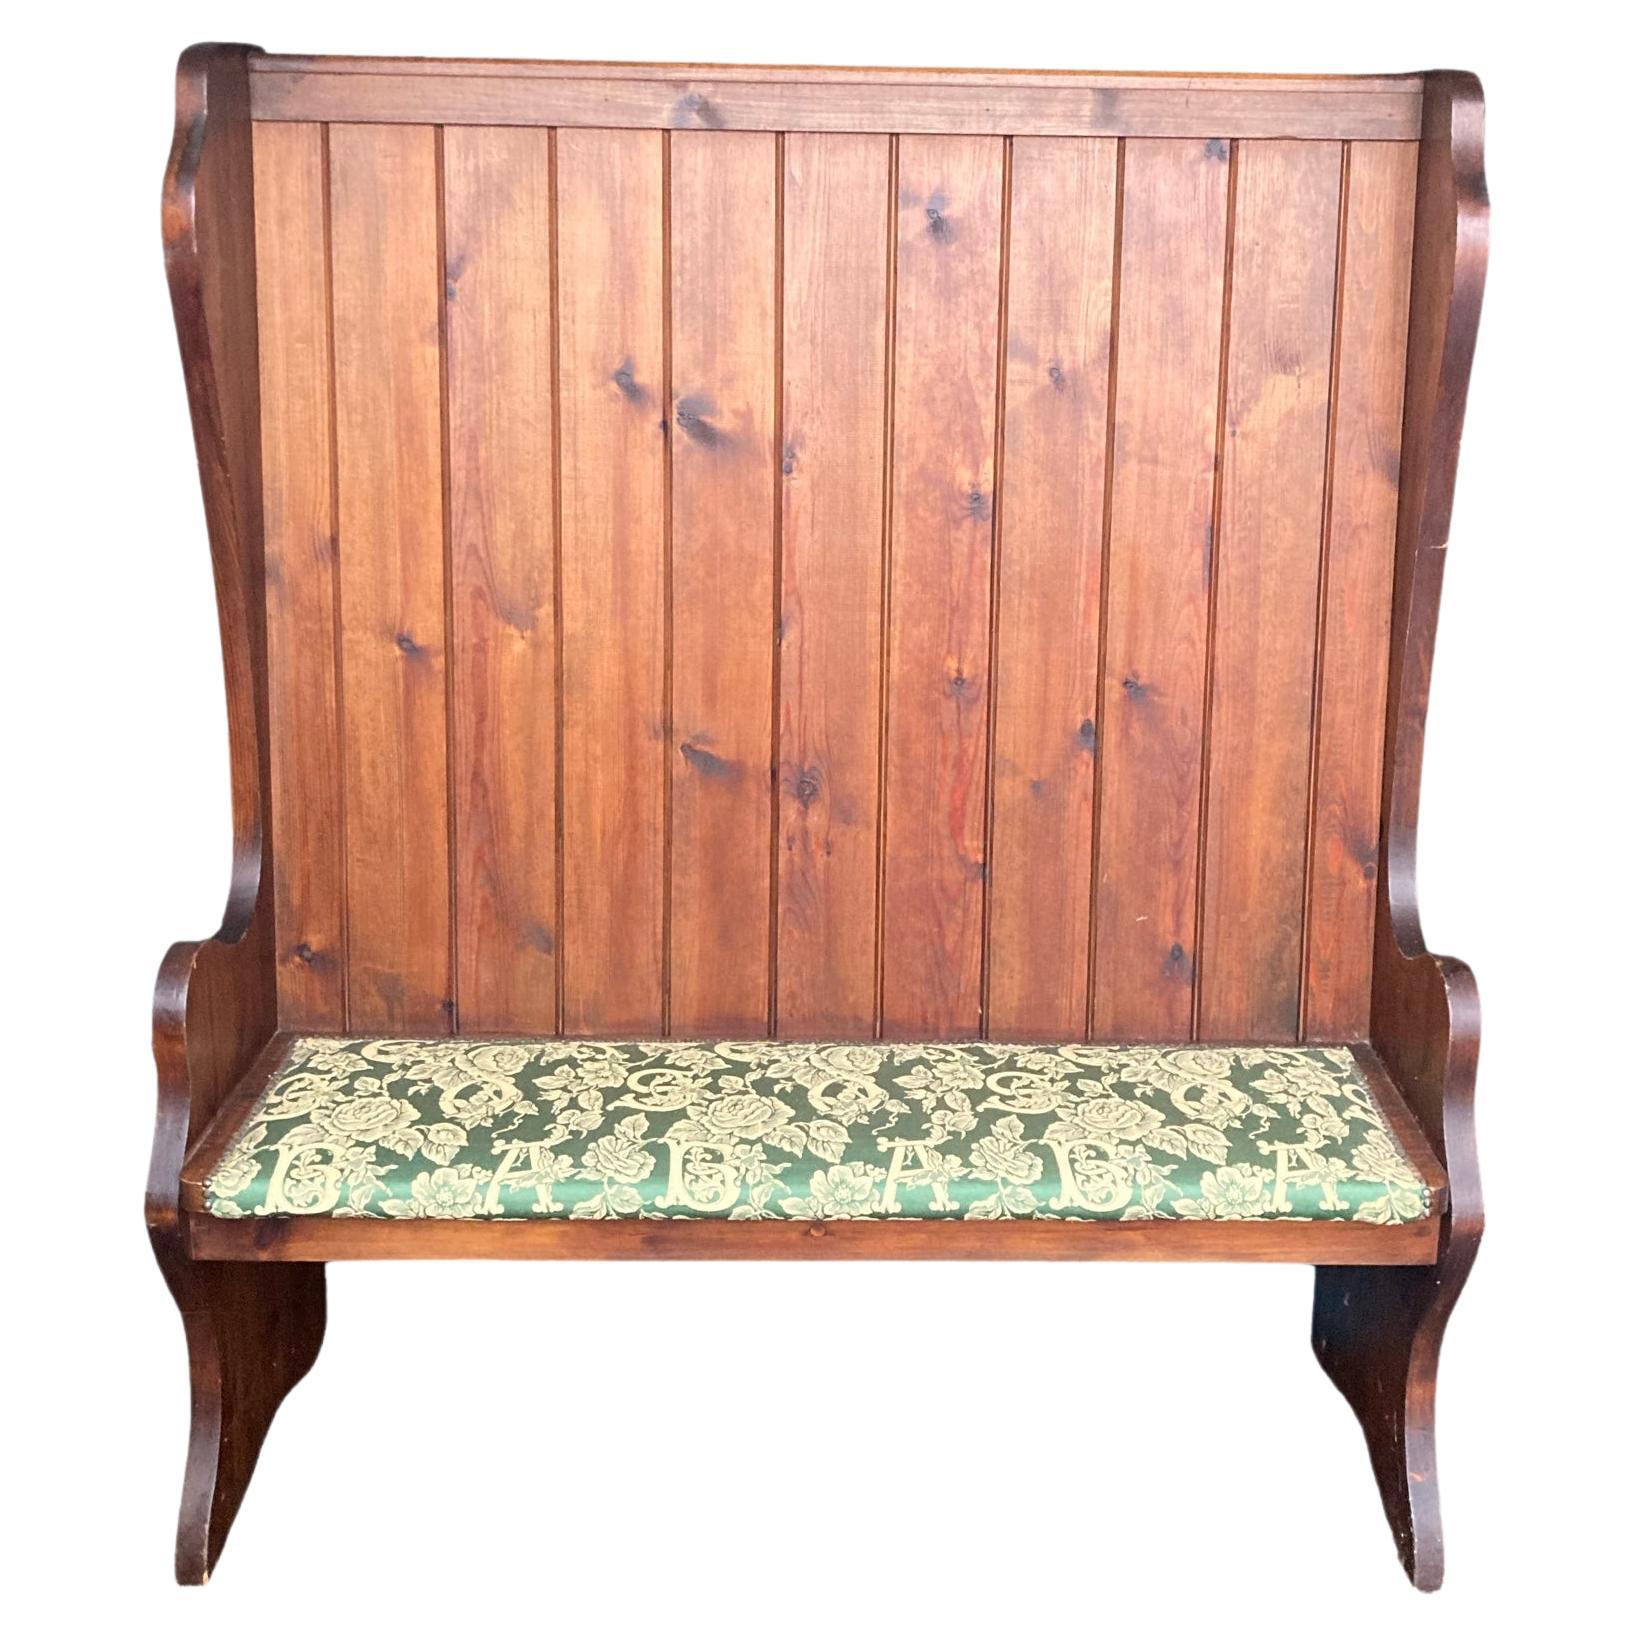 Large Antique High Back Pine Church Pew Bench CIRCA 1920'S For Sale